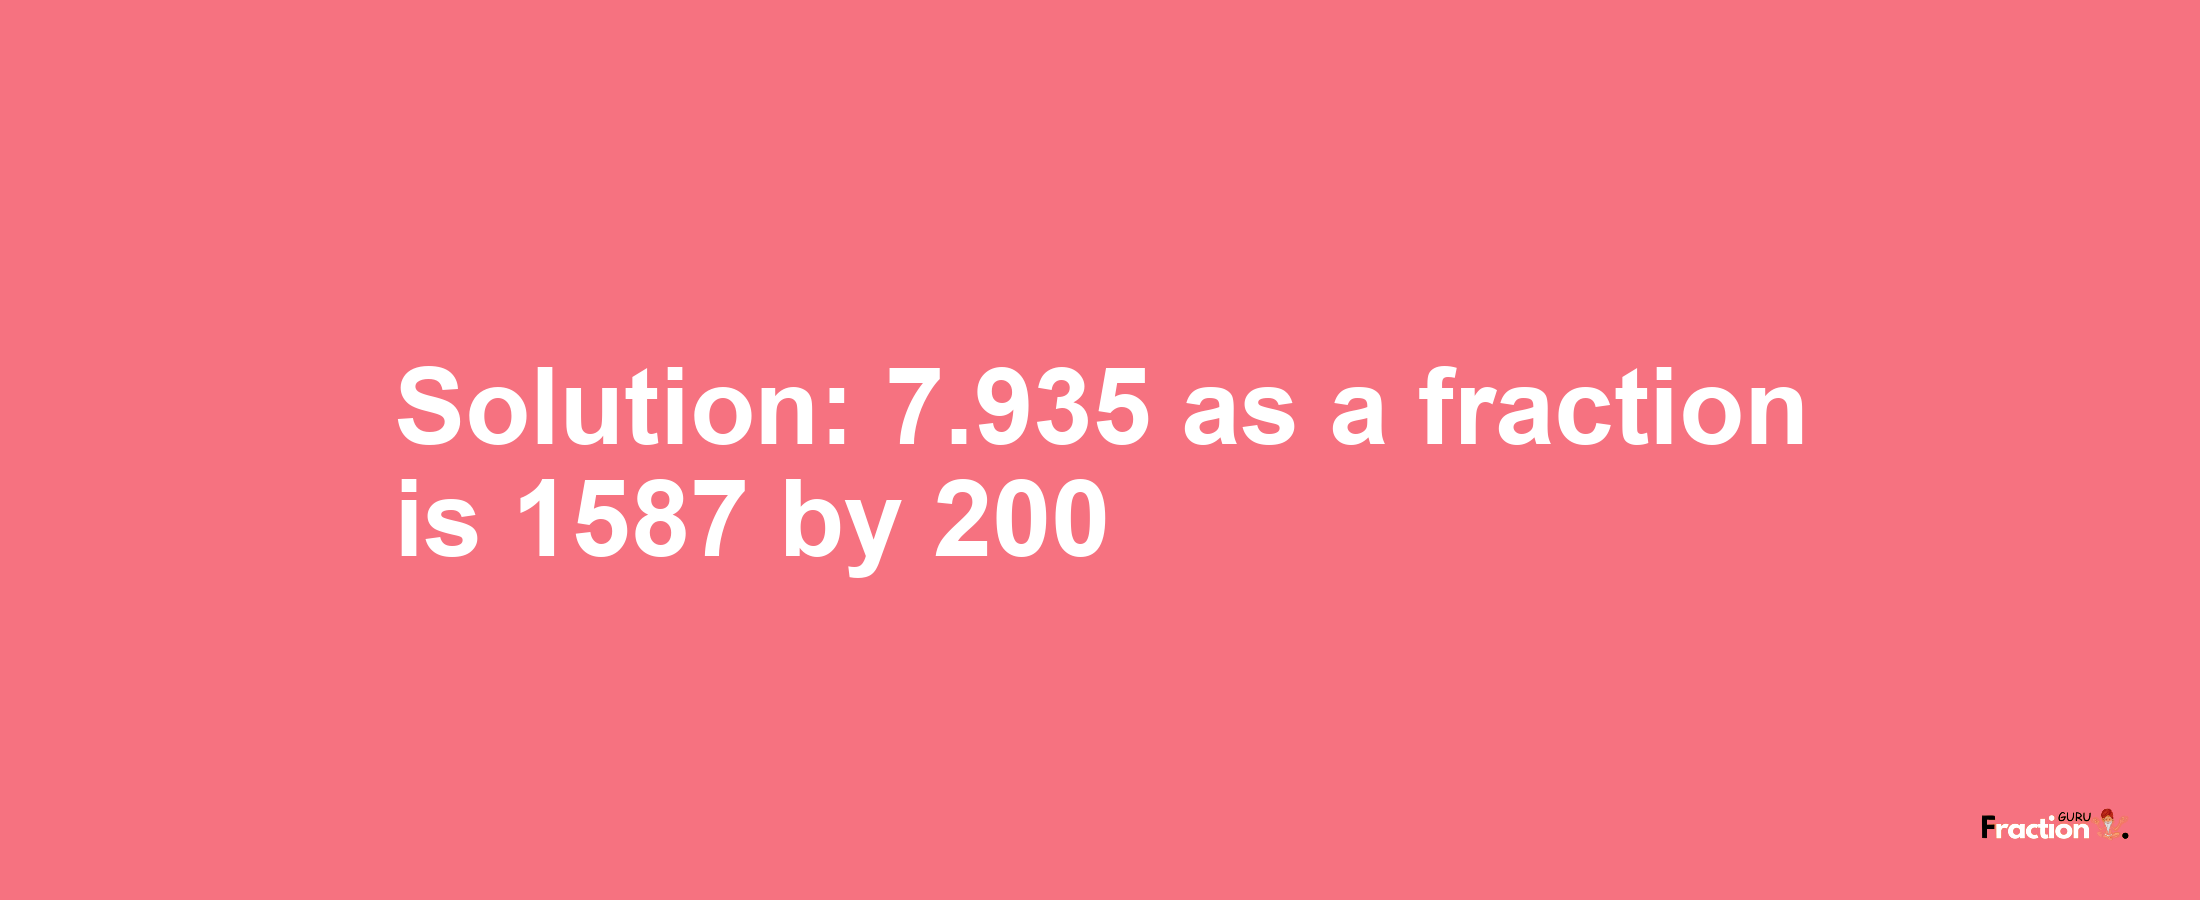 Solution:7.935 as a fraction is 1587/200